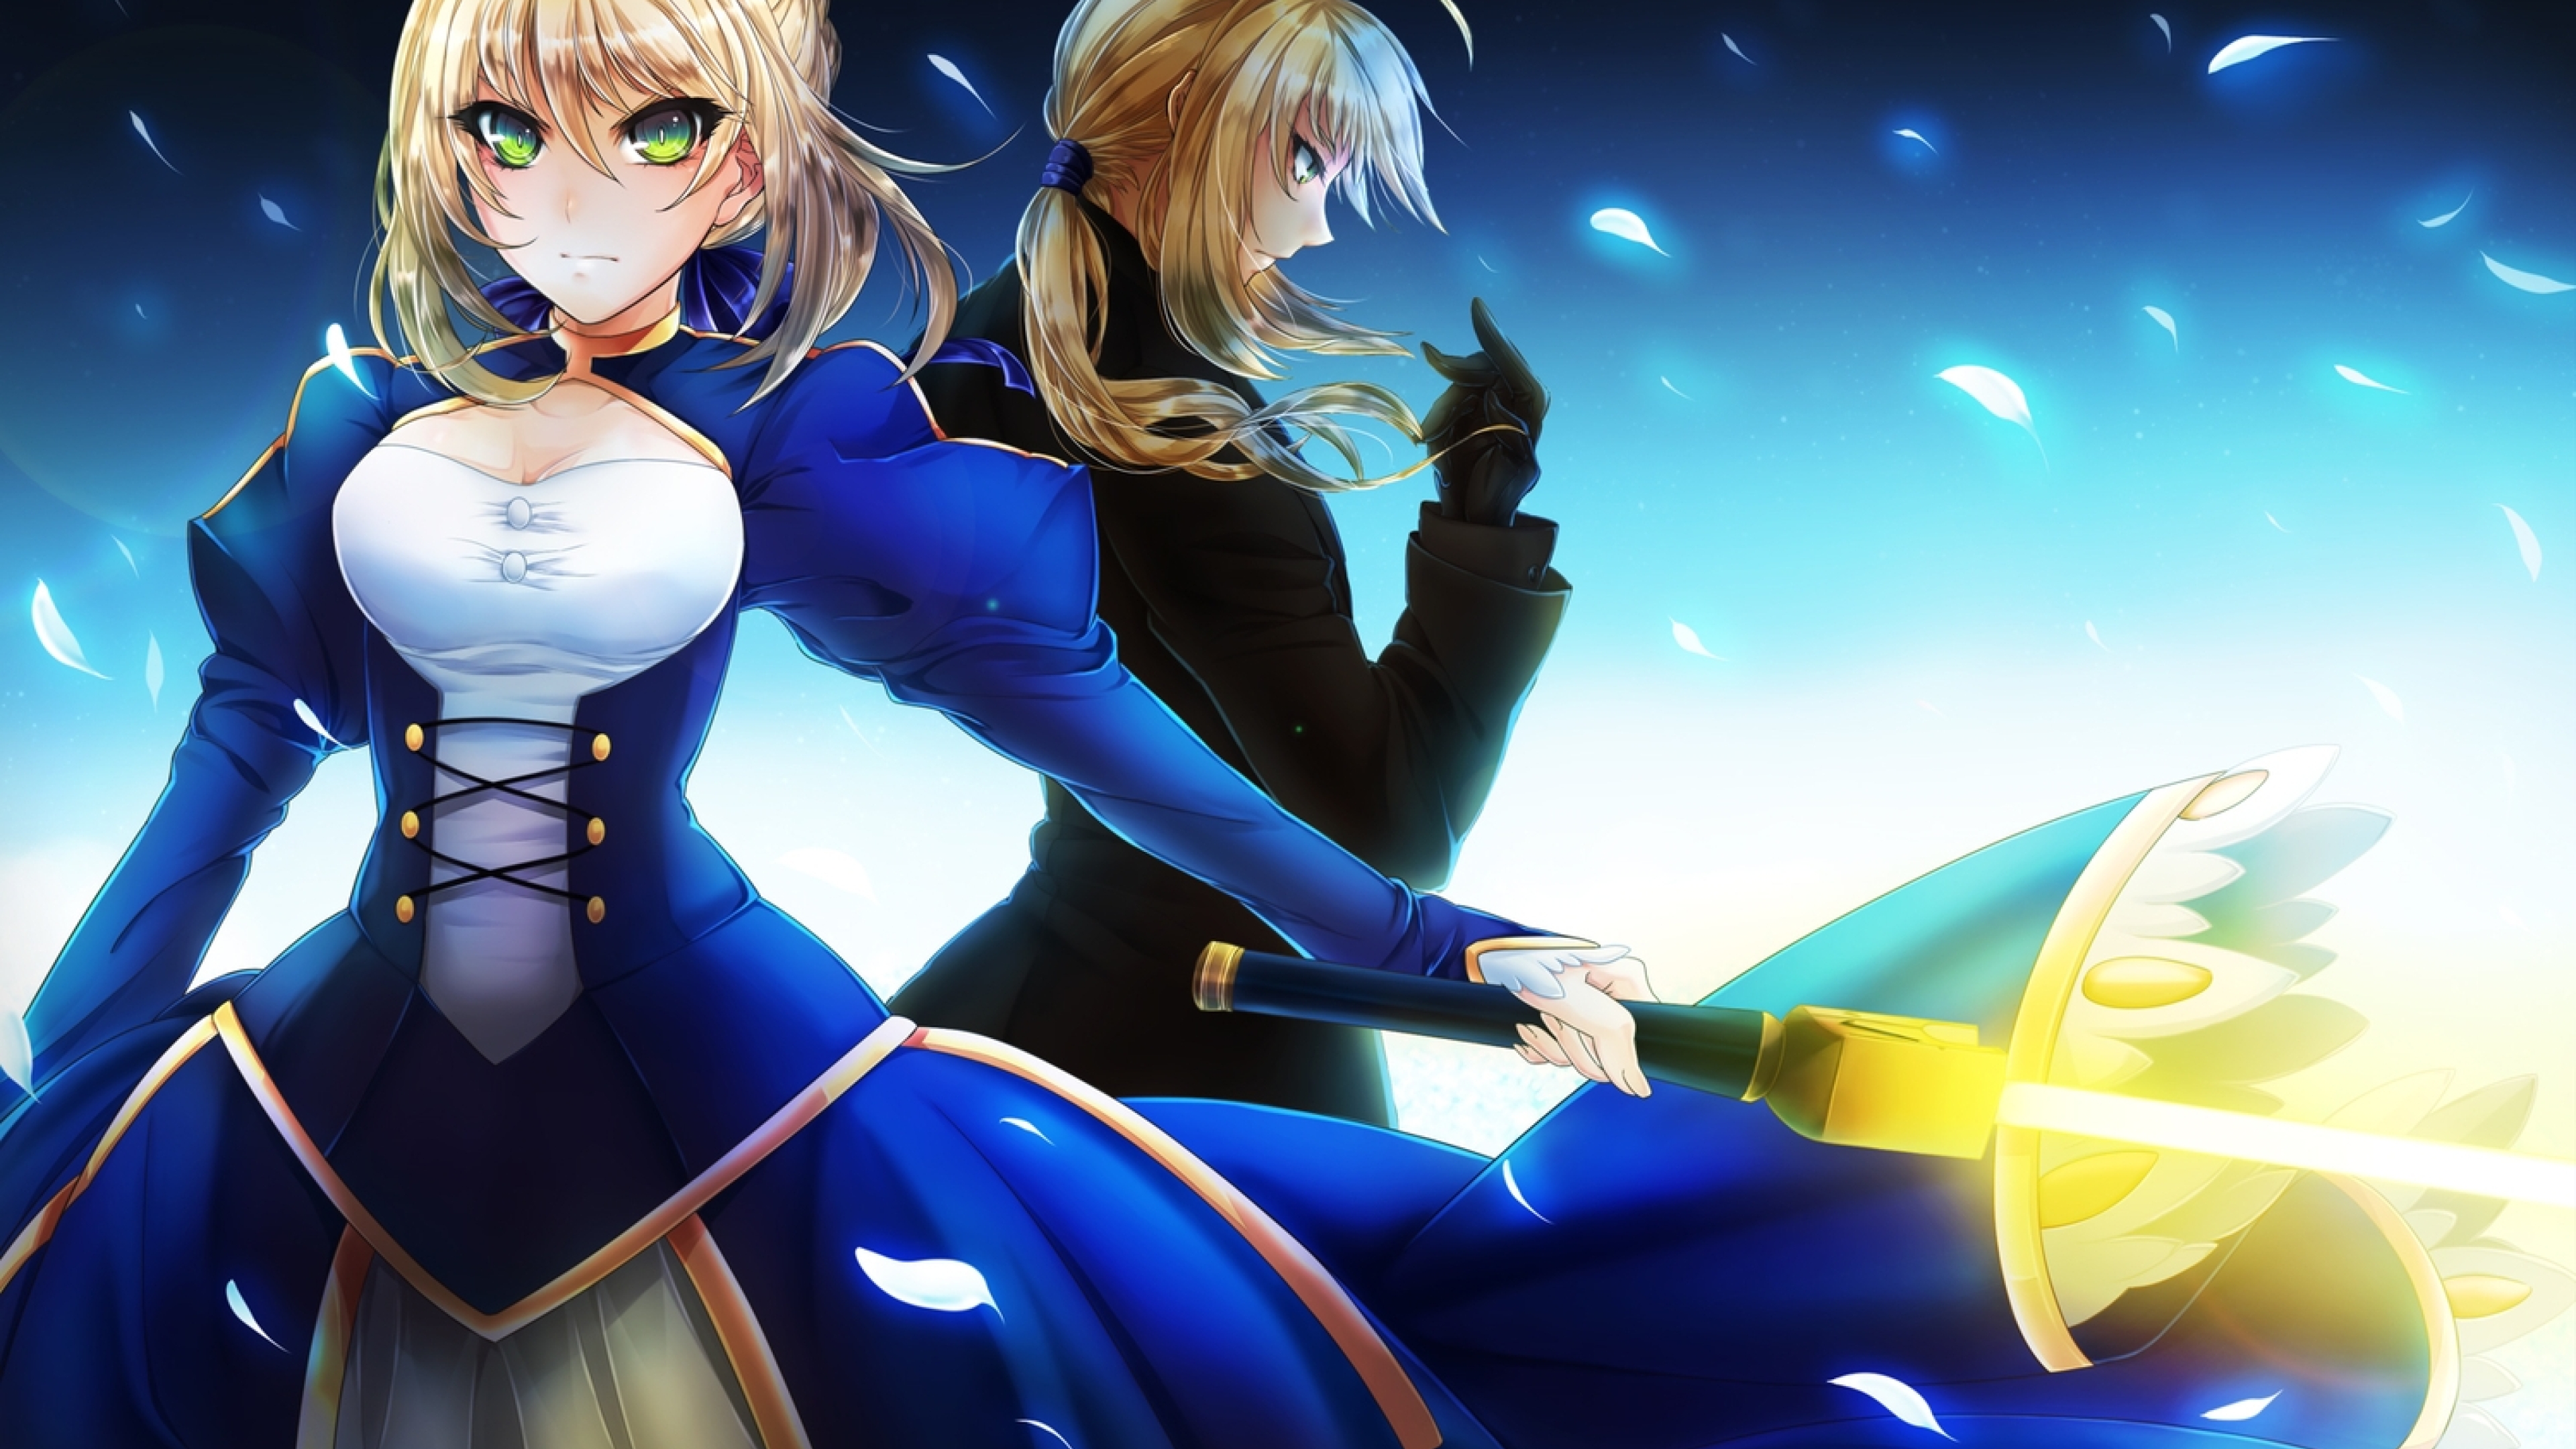 3840x2160 Fate Stay Night Fate Zero Saber Girl 4k Wallpaper Hd Anime 4k Wallpapers Images Photos And Background Wallpapers Den